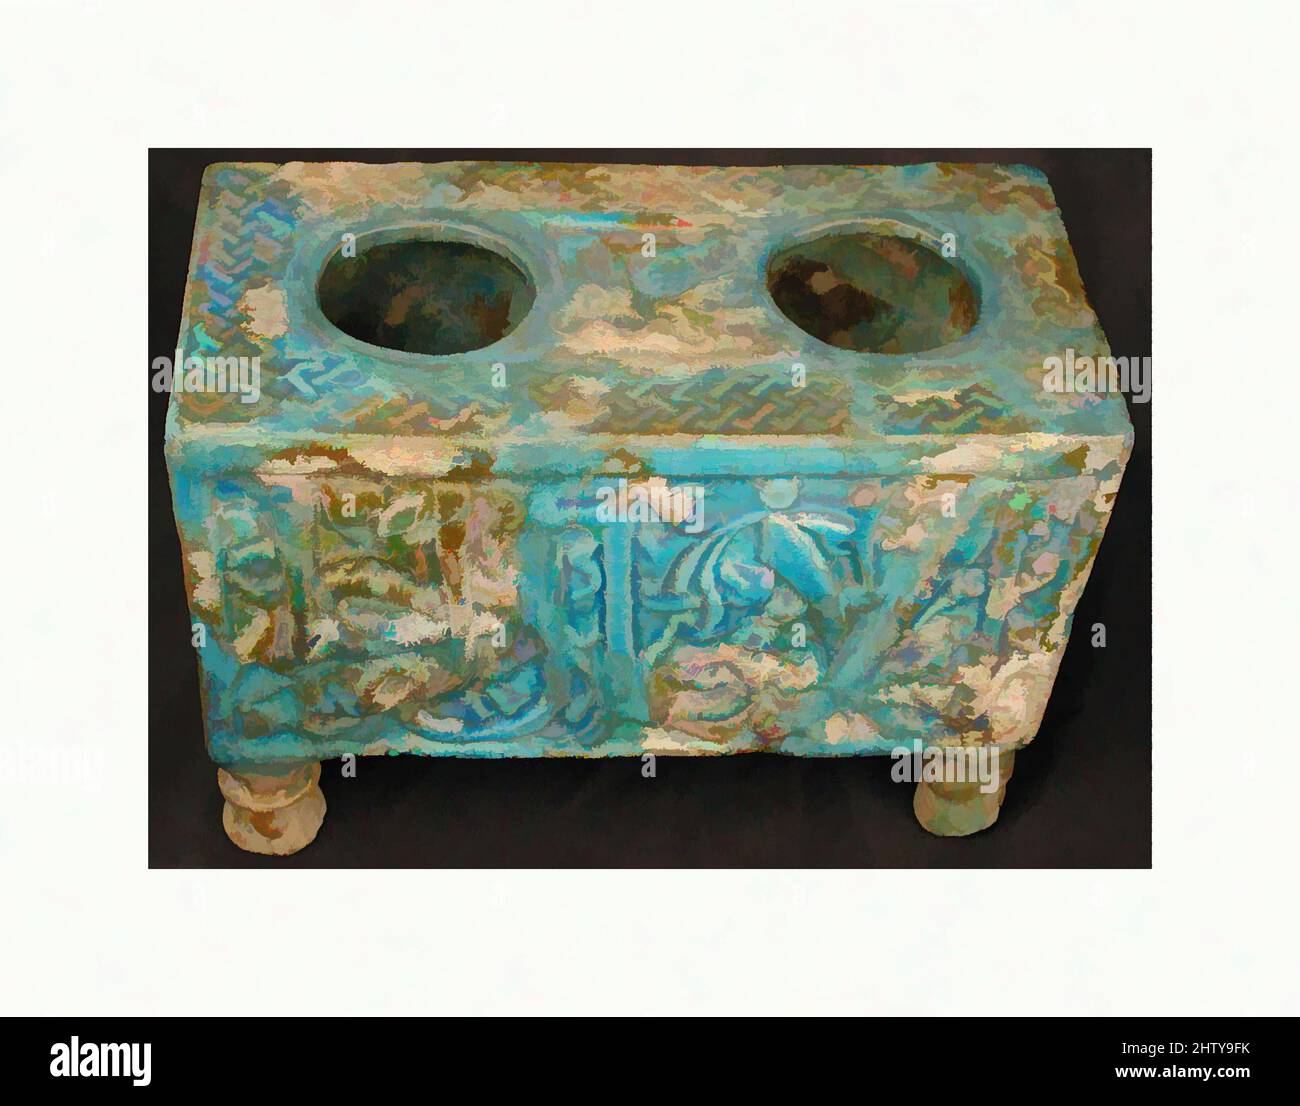 Art inspired by Tabouret, 12th–13th century, Made in Syria, Raqqa, Stonepaste; molded and glazed, 7 7/8 x 11 3/8 x 5 1/2 in. (20 x 28.9 x 14 cm), Ceramics, Classic works modernized by Artotop with a splash of modernity. Shapes, color and value, eye-catching visual impact on art. Emotions through freedom of artworks in a contemporary way. A timeless message pursuing a wildly creative new direction. Artists turning to the digital medium and creating the Artotop NFT Stock Photo